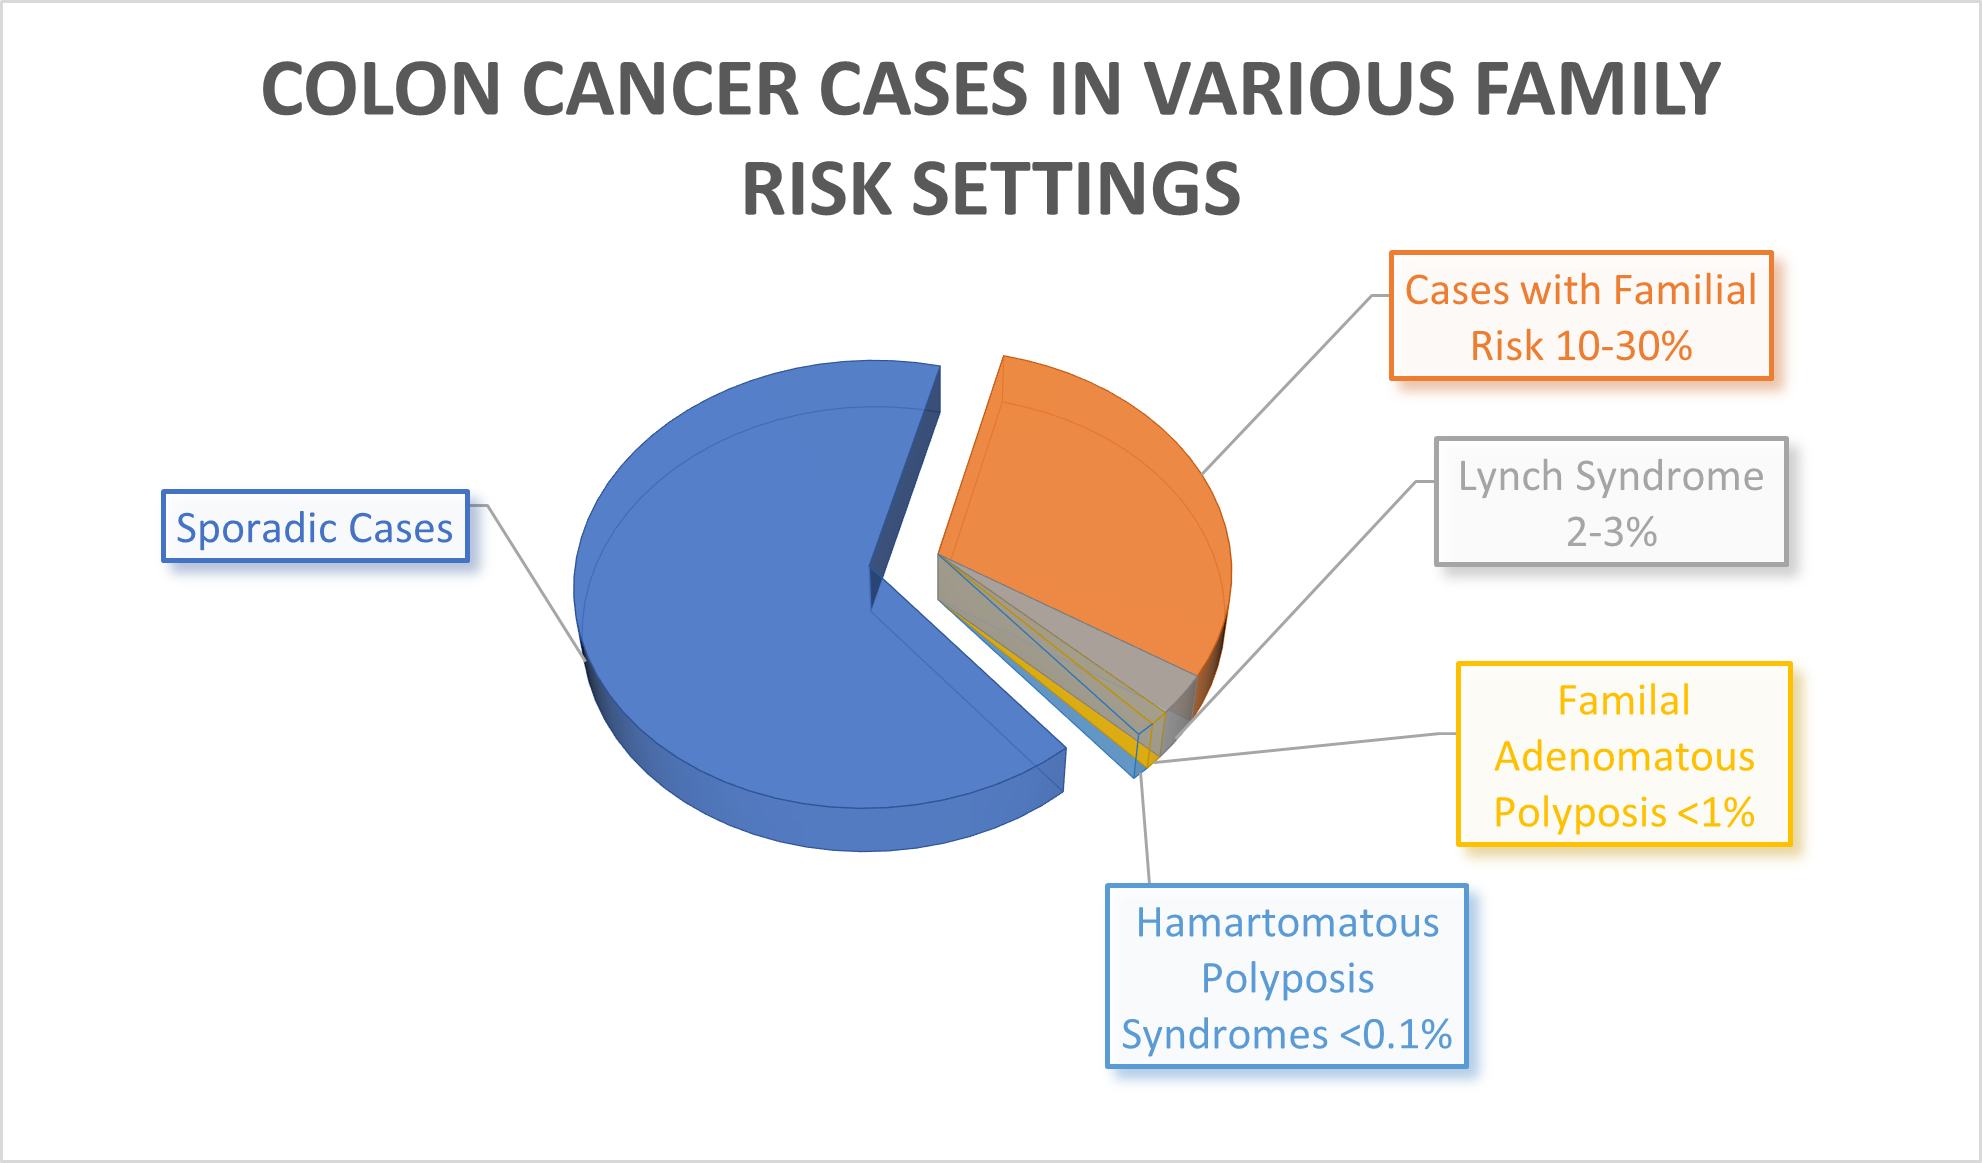 Colon cancer cases in various family risk settings